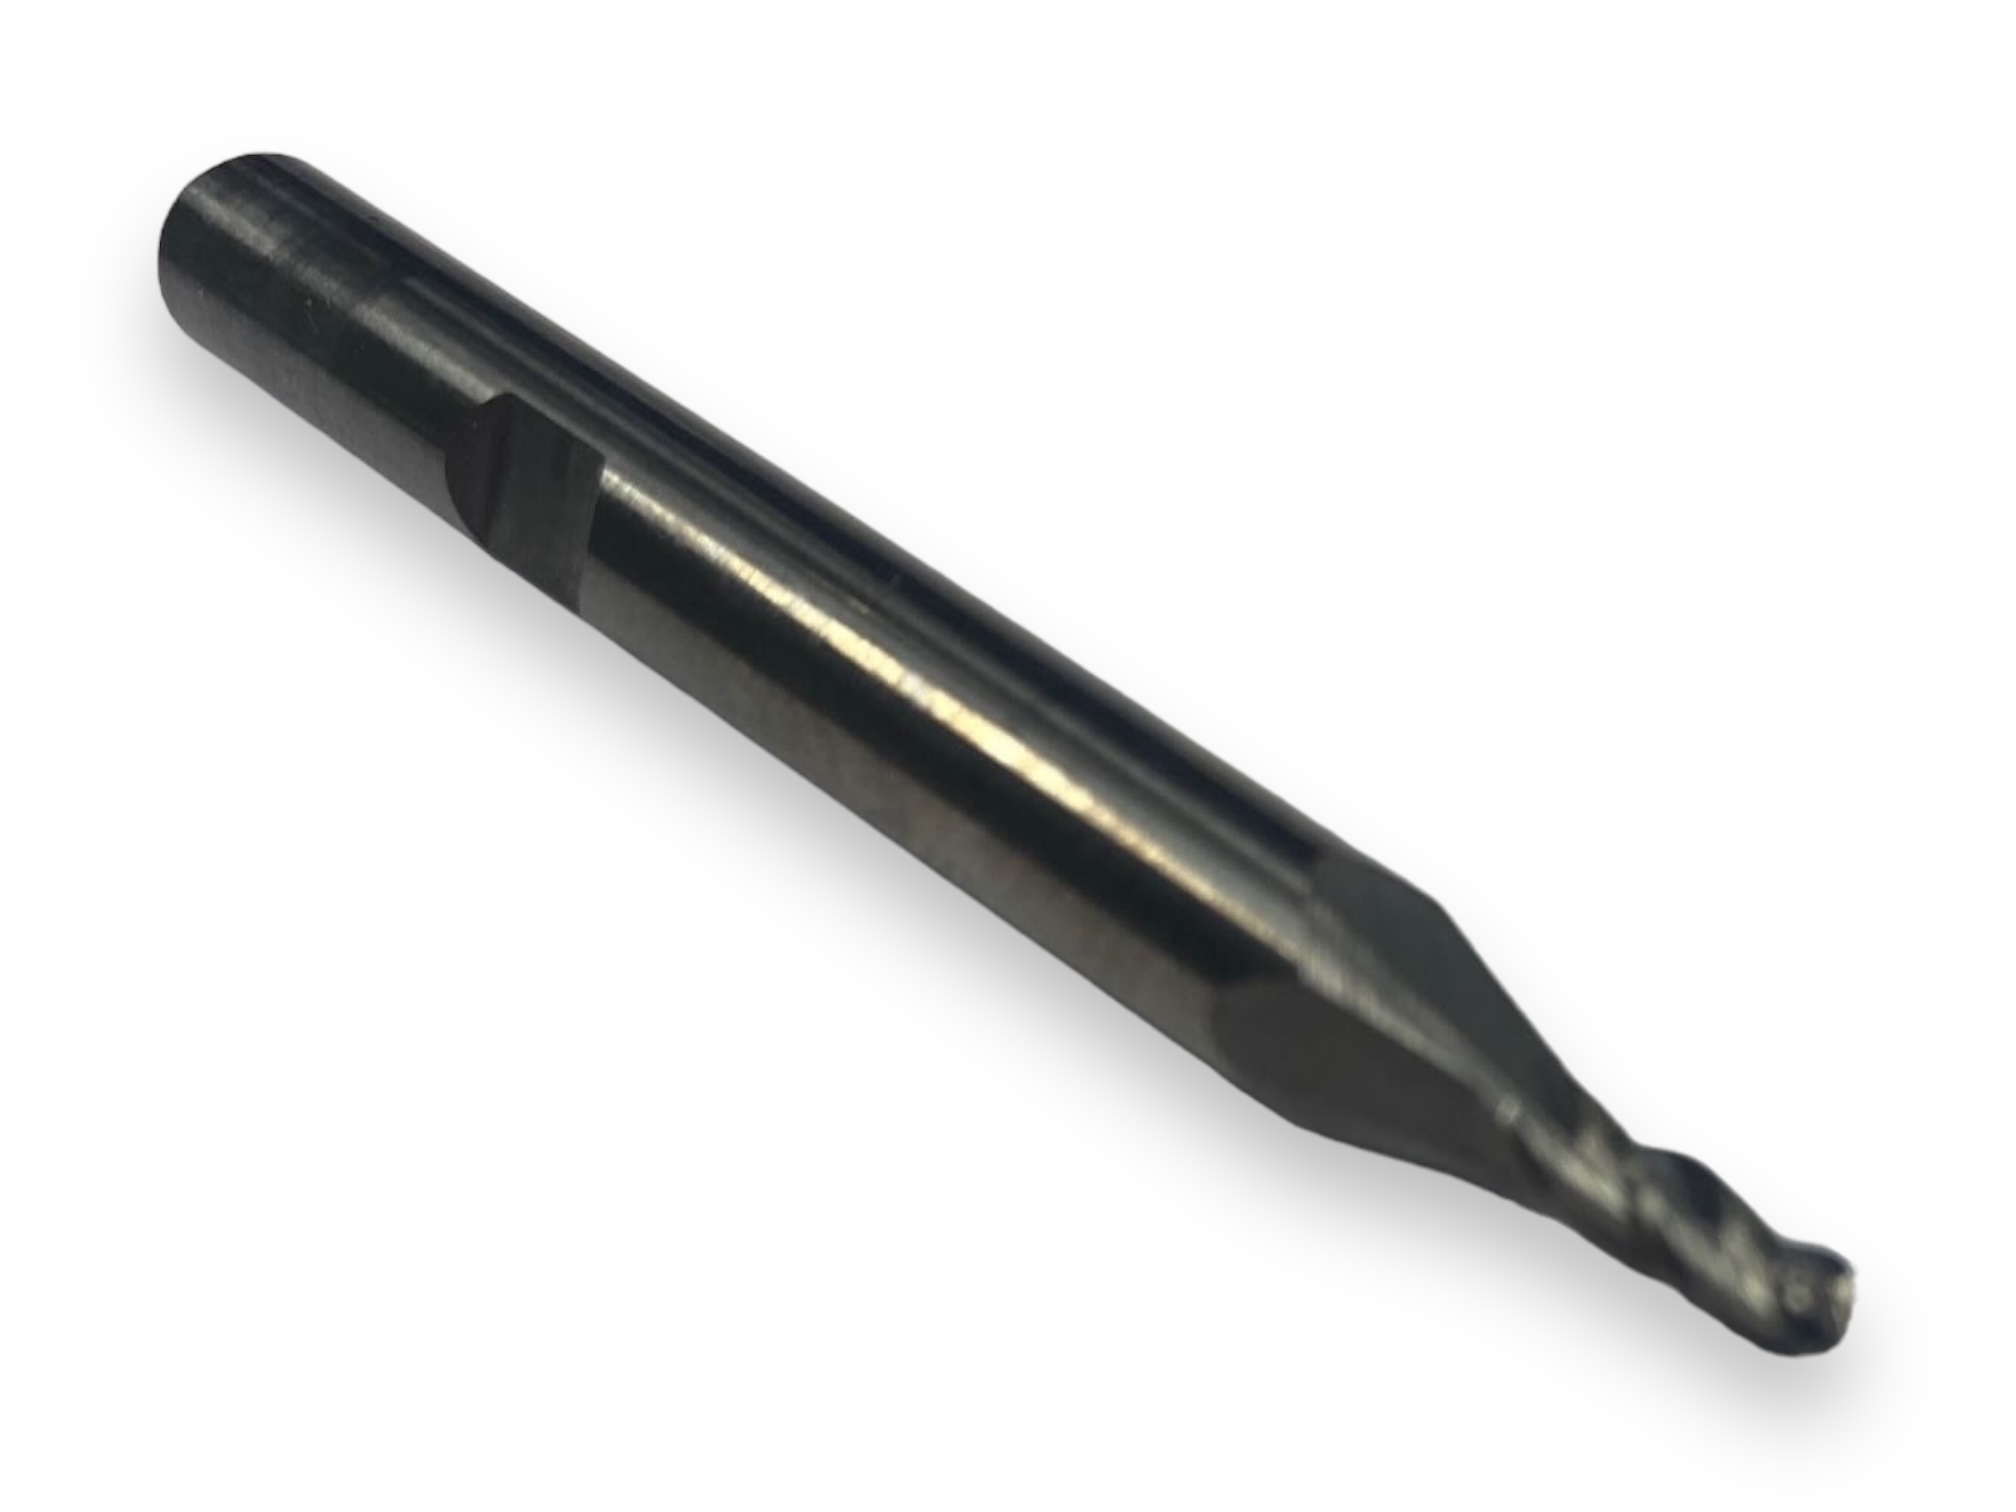 WNT 3.0 Ball Nose End Mill Carbide